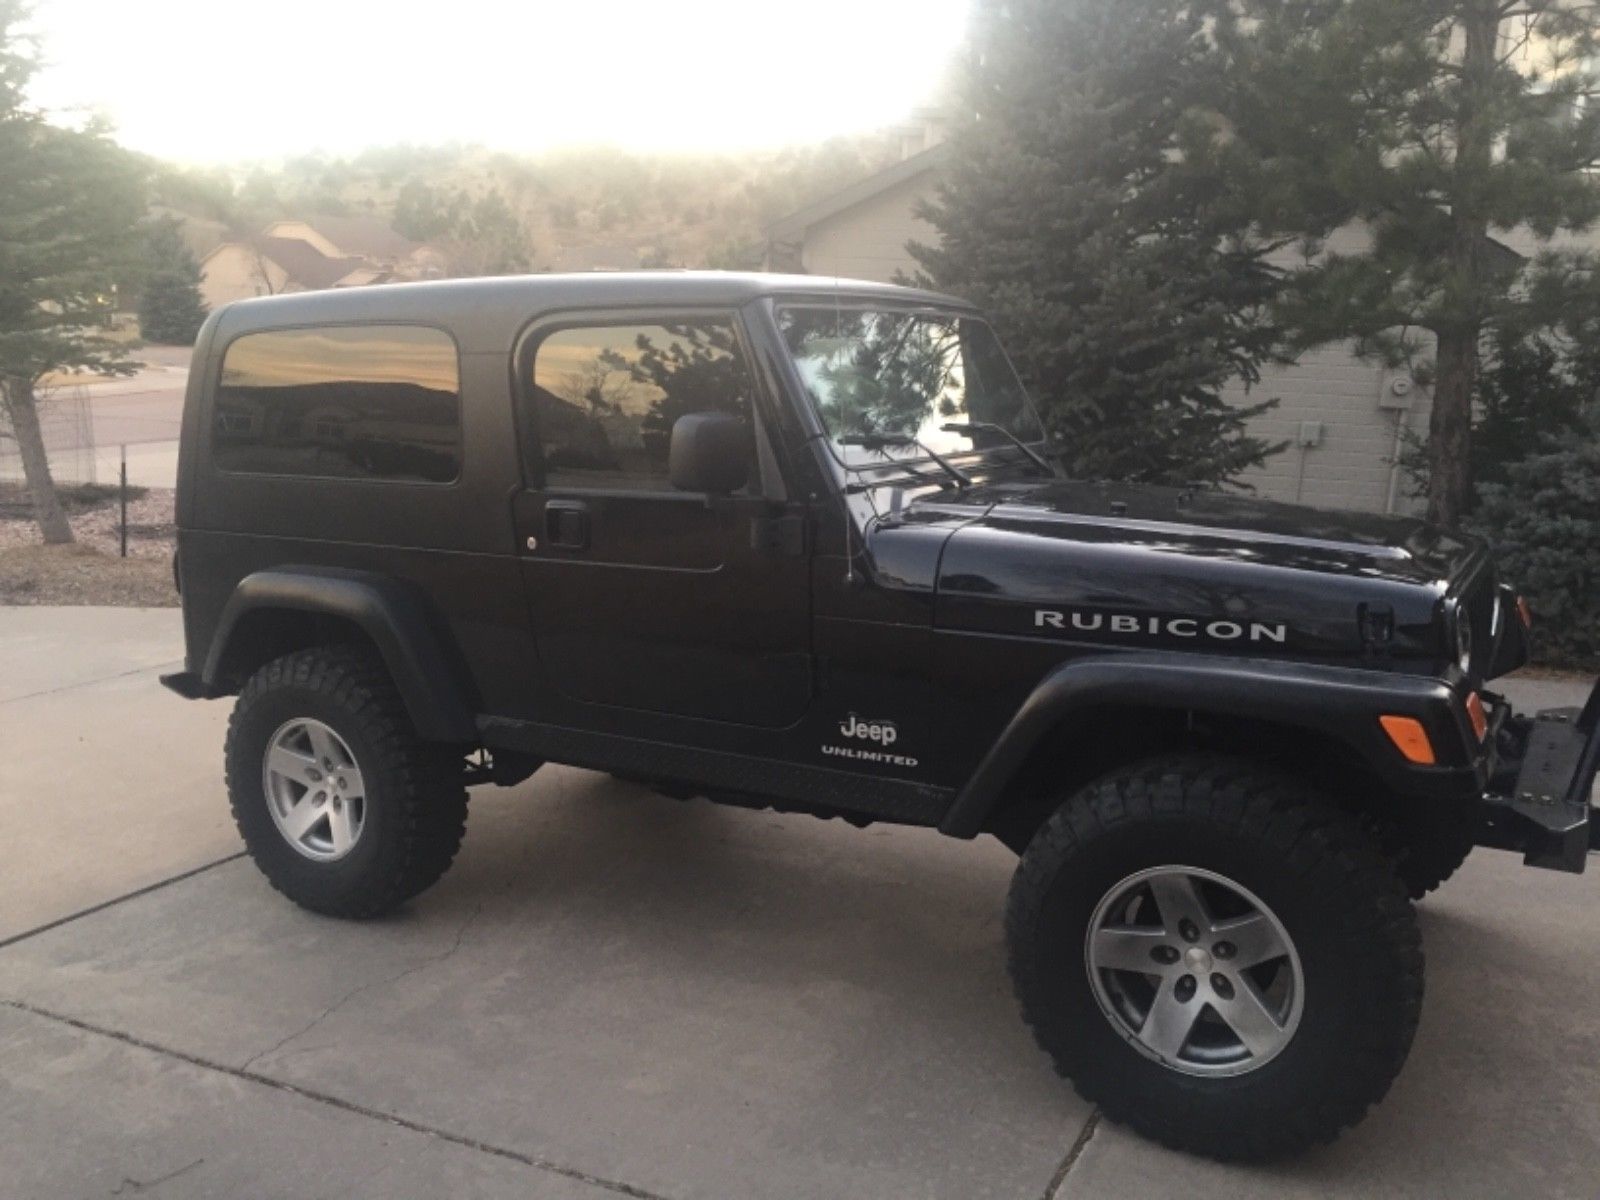 2006 Jeep Wrangler Unlimited rubicon 2006 Jeep Wrangler rubicon unlimited LJ  2022 2023 is in stock and for sale - Price & Review 2022 2023